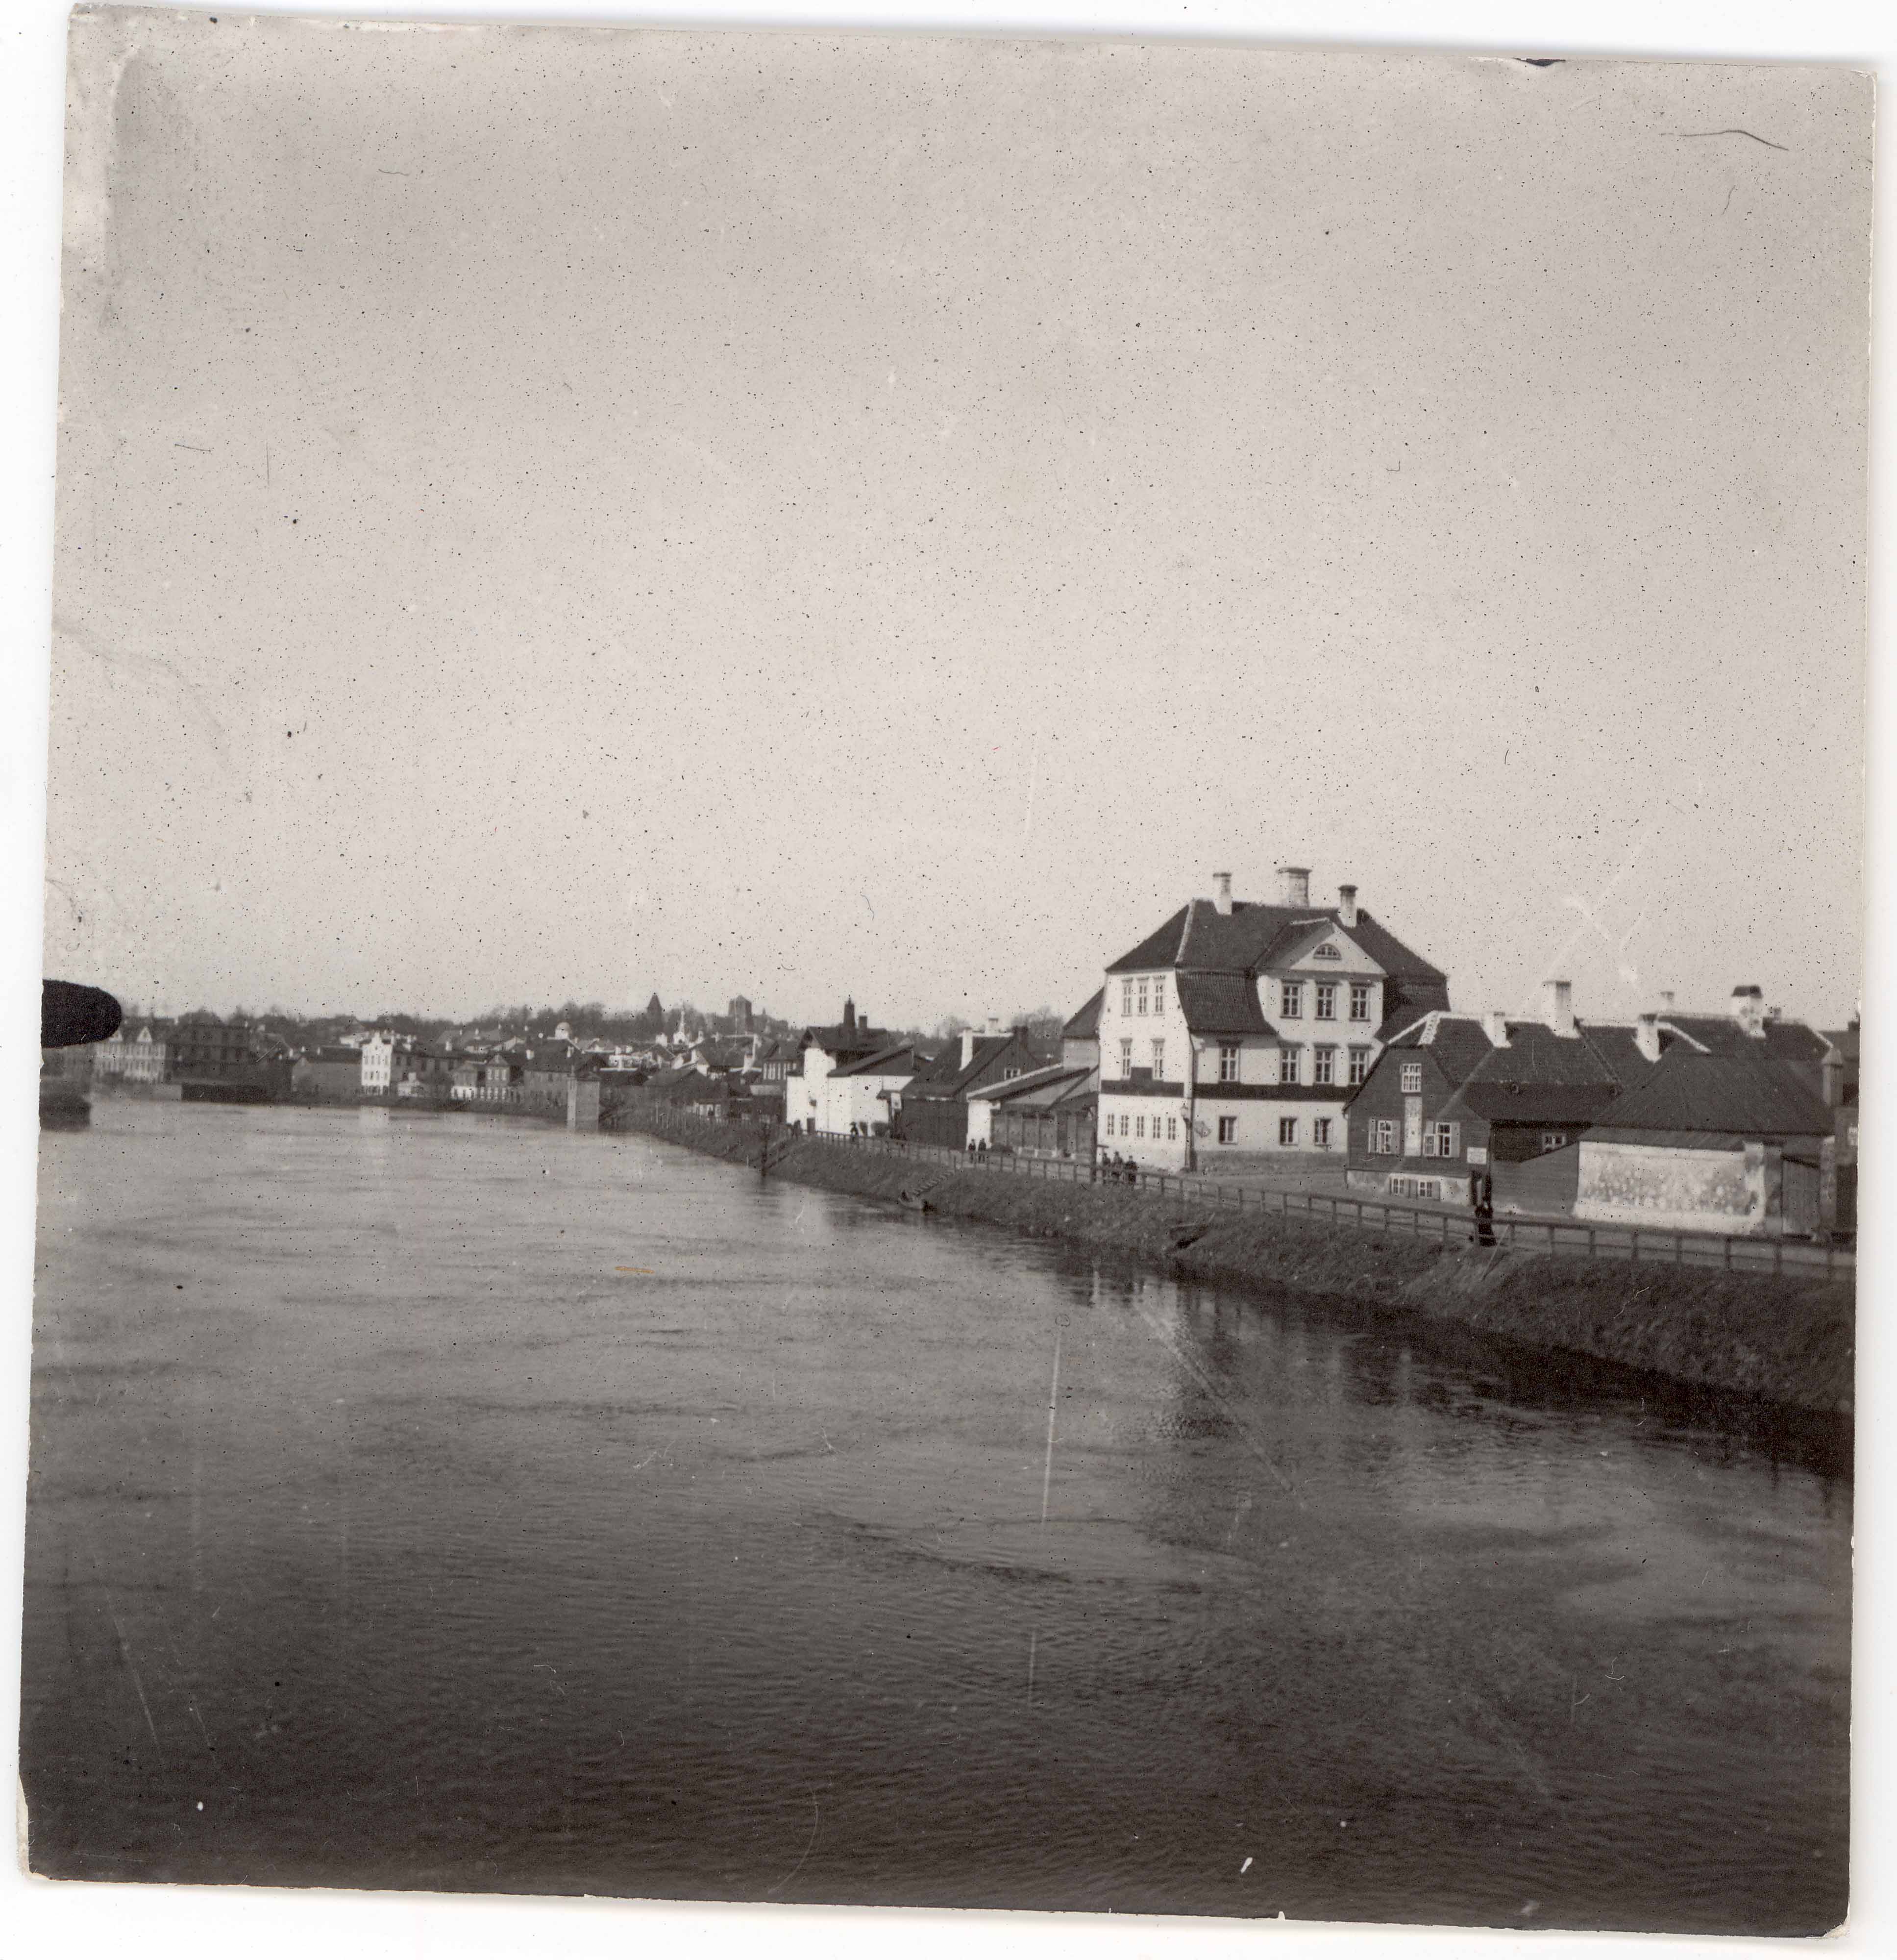 View from the stone bridge to the houses of Kalda tn. On the right mansard roof double house is the building of h. Treffner Gymnasium